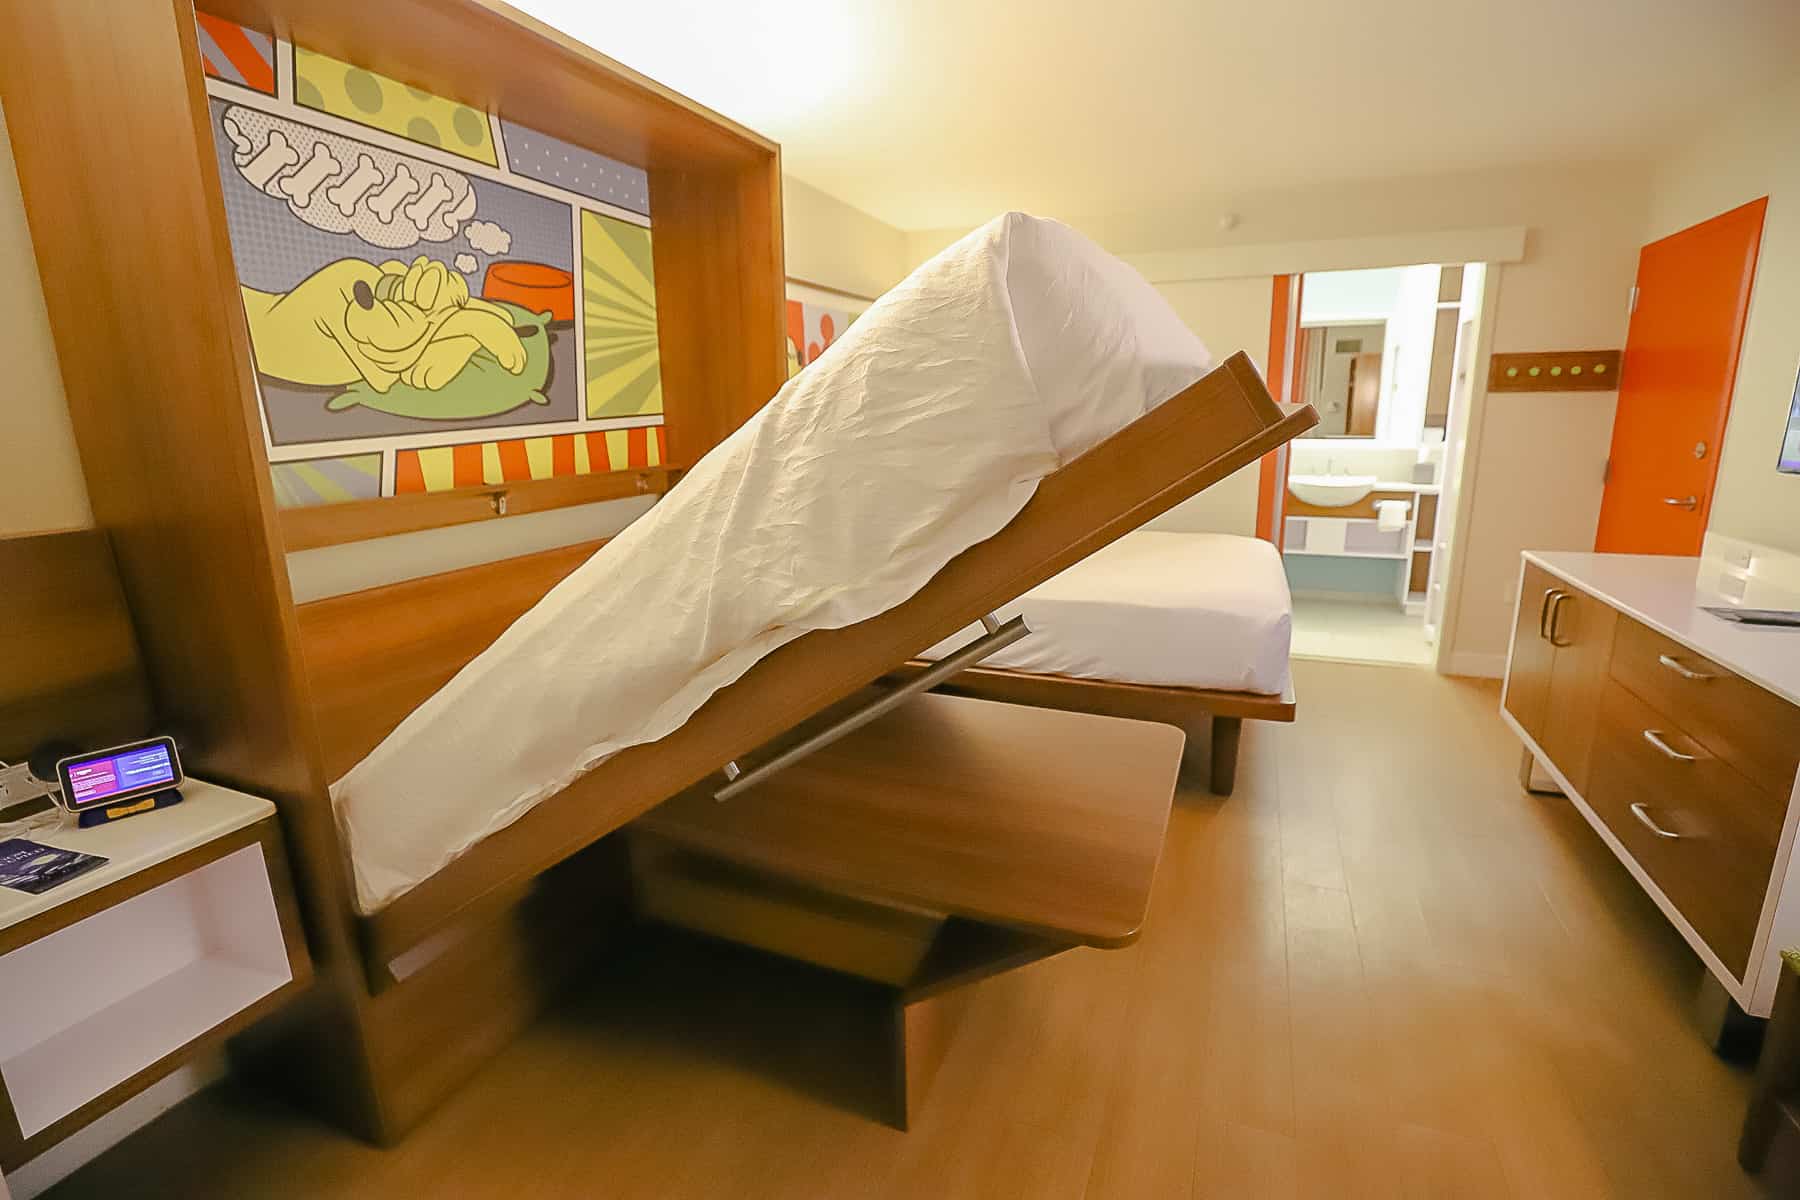 shows how one of the bed folds down from the wall 